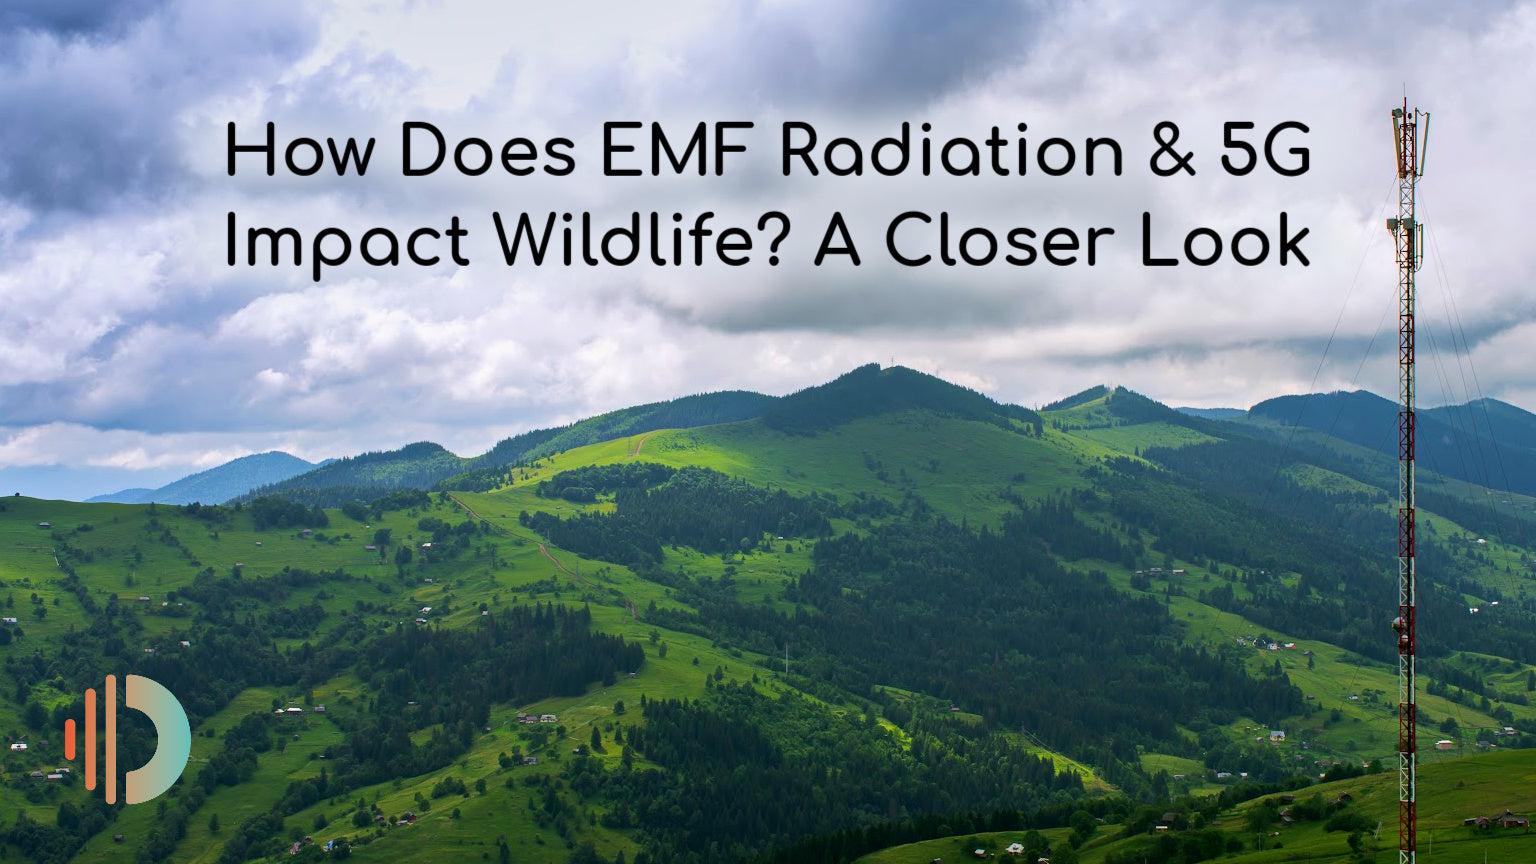 Can EMF Radiation 5G Impact Wildlife? Find Out in Environmental Studies Report